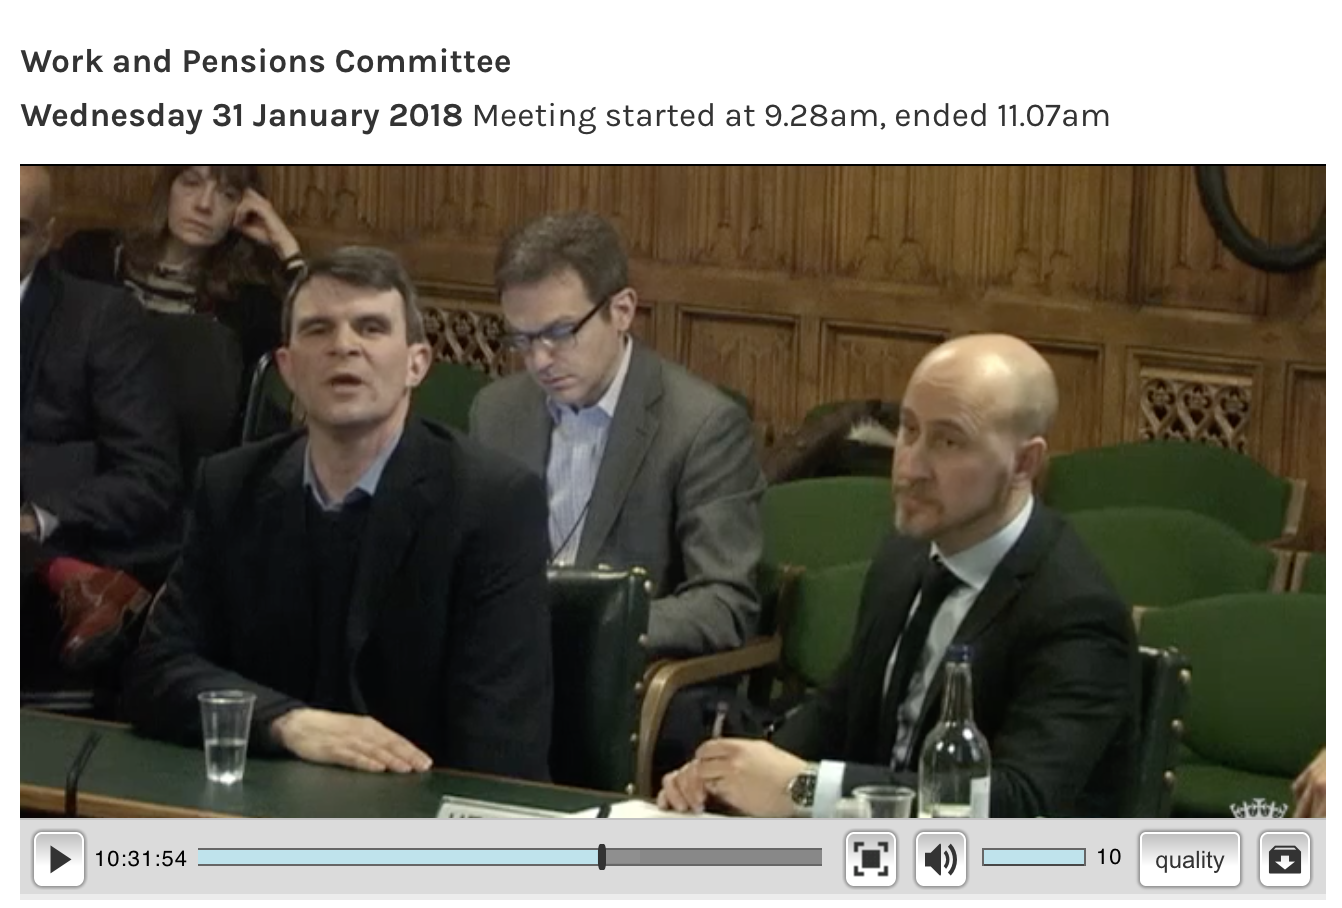 Parliament TV showed the session live and the recording is online now